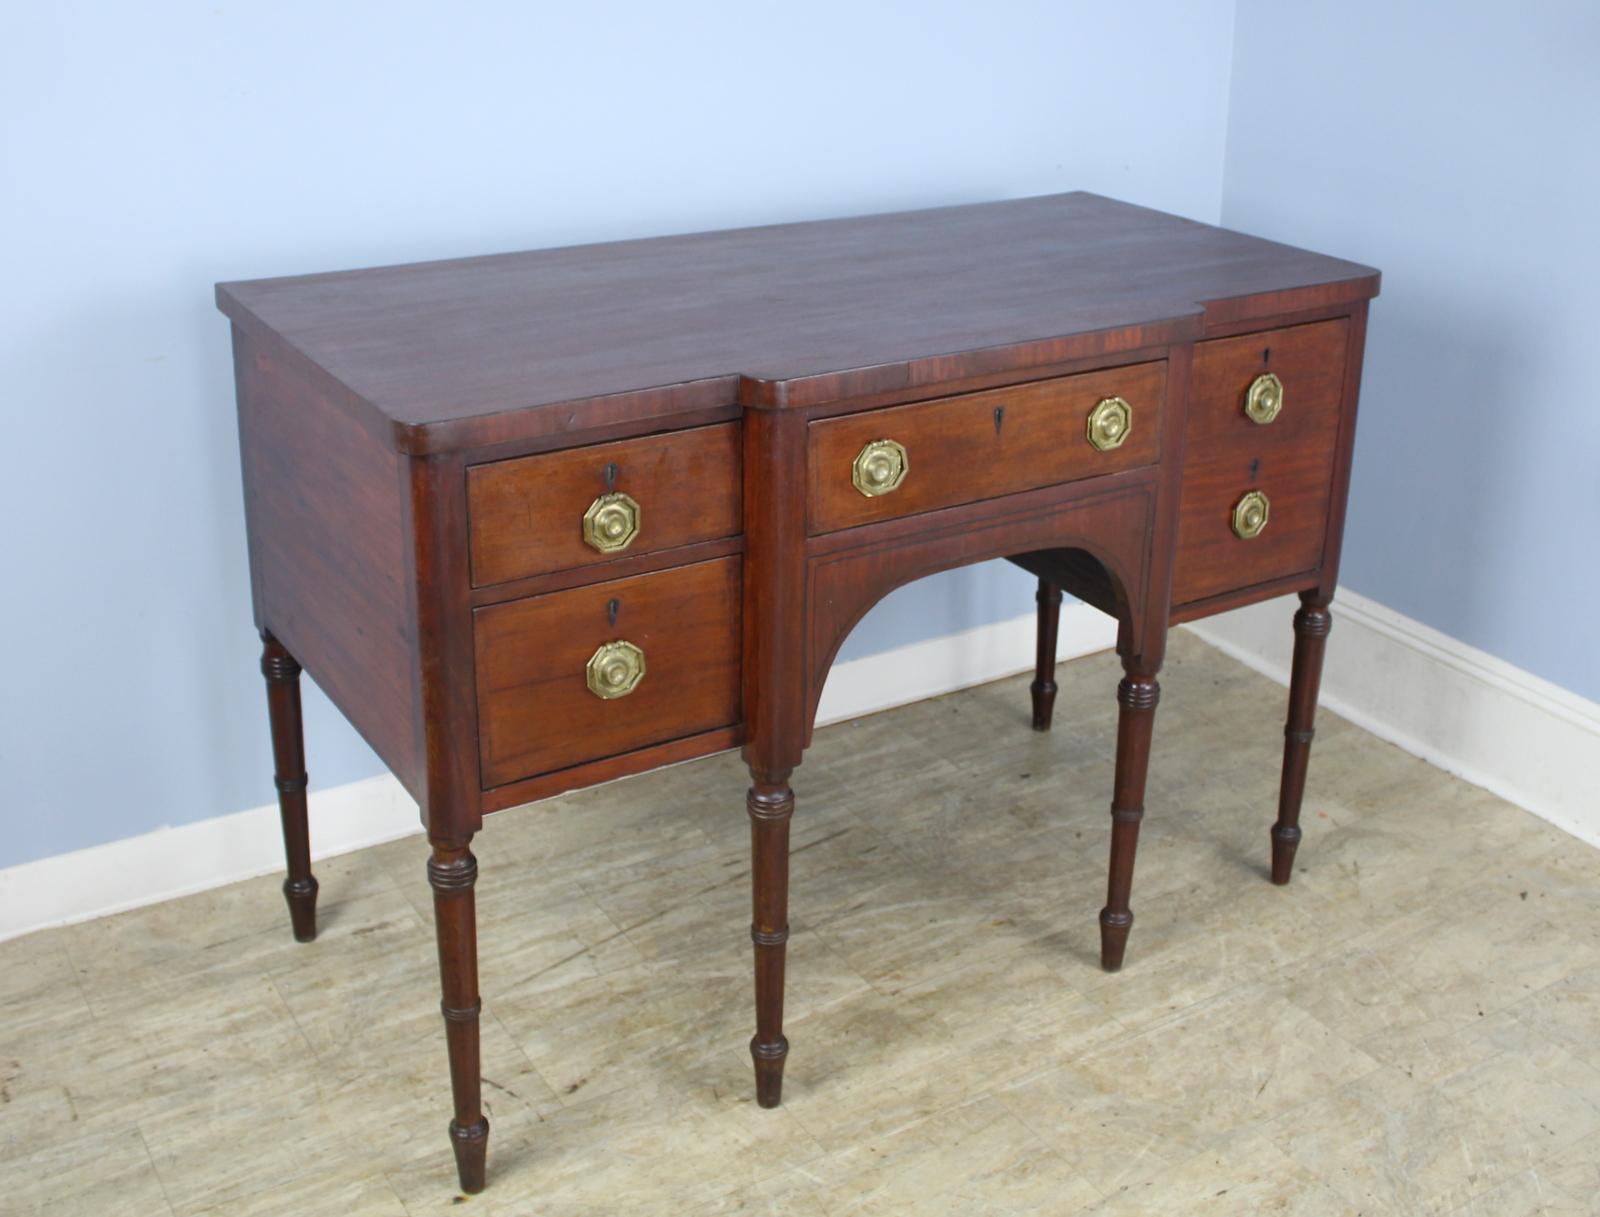 Quite formal and fabulous. This early mahogany sideboard has wonderful turned legs, good storage and a surprise double deep right drawer. Original ebony string inlay and good brass handles. Sturdy and stable. There is some age appropriate distress